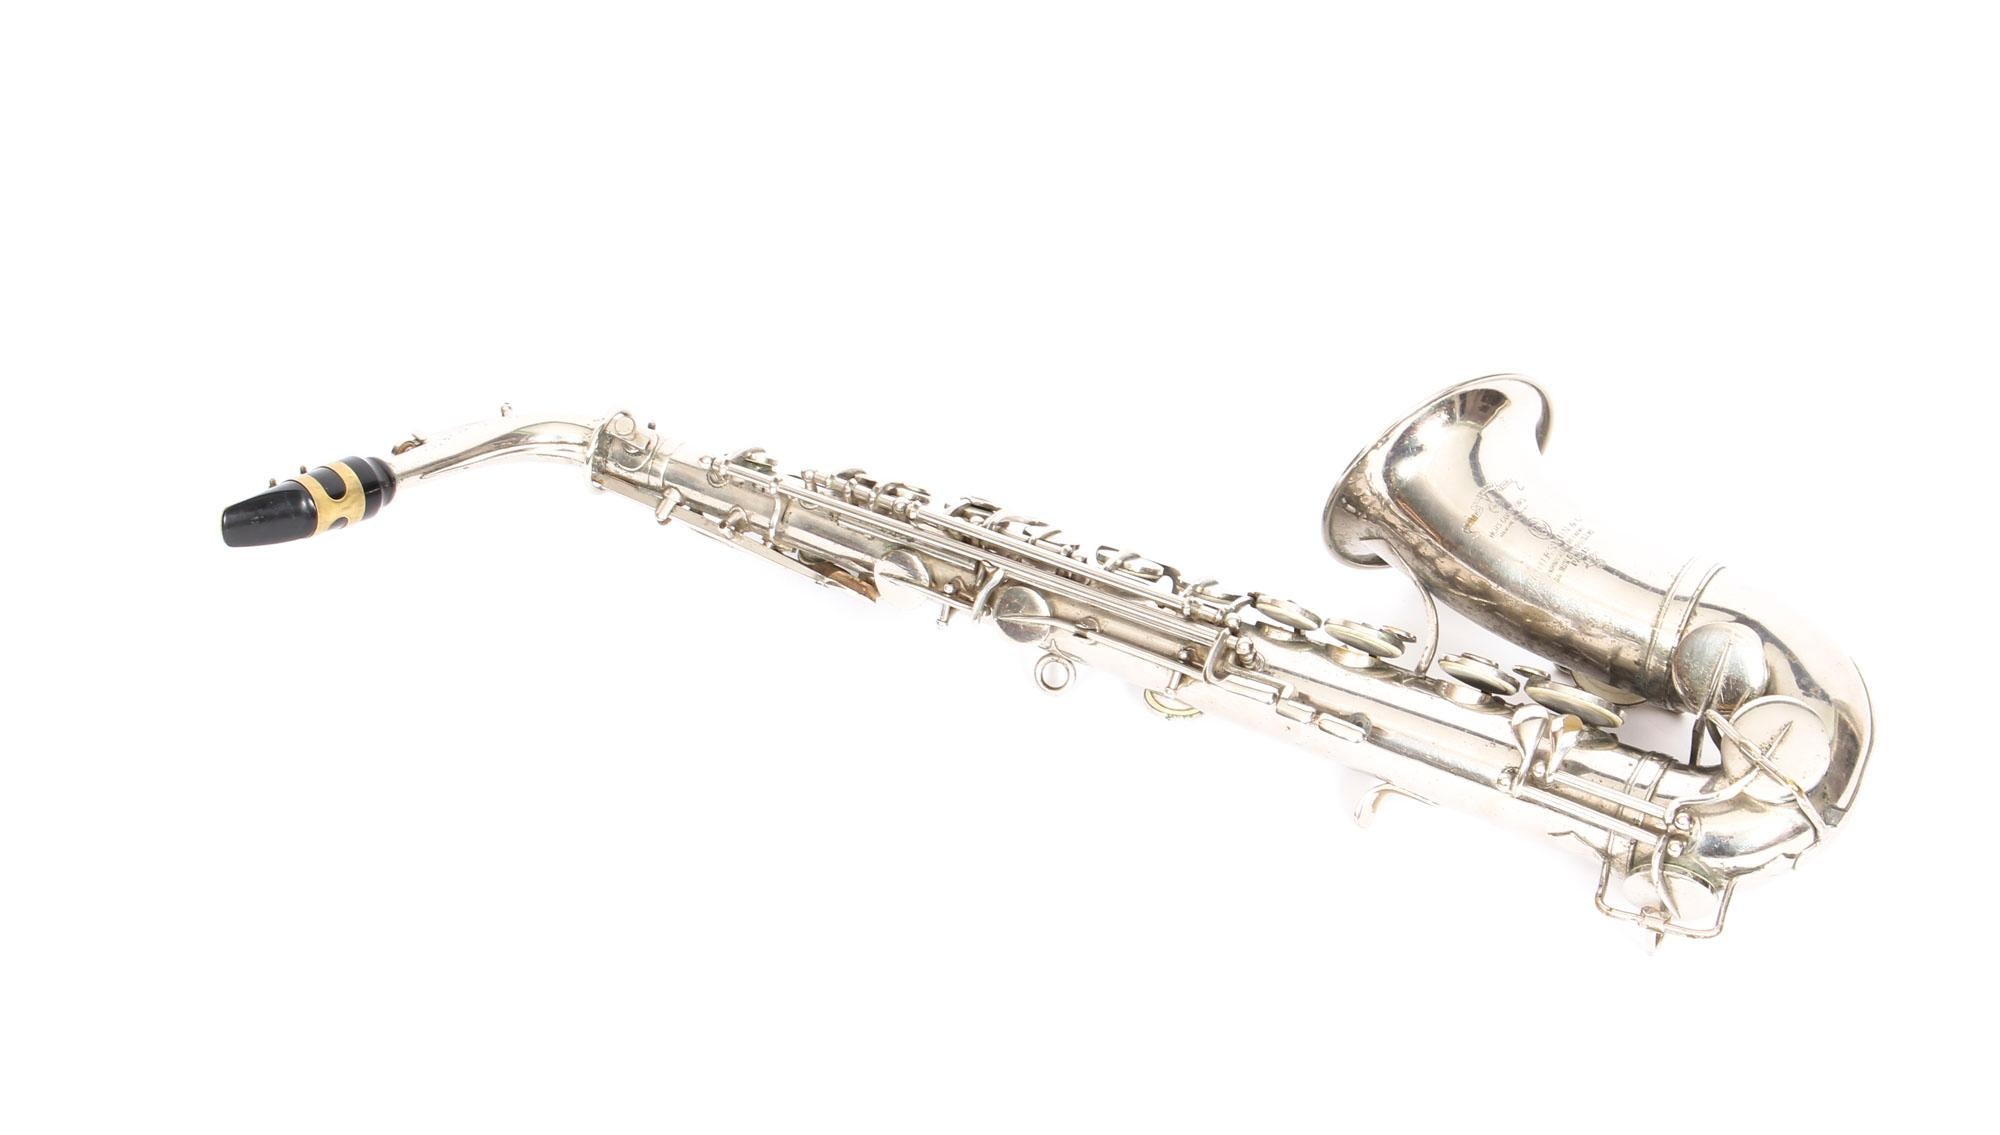 This is a splendid and rare antique French silver plated saxophone with the original playing booklet by the world-famous manufacturer of musical instruments, Couesnon et Cie, and dating from 1929.
 
Distinctively made of silver plate, as compared